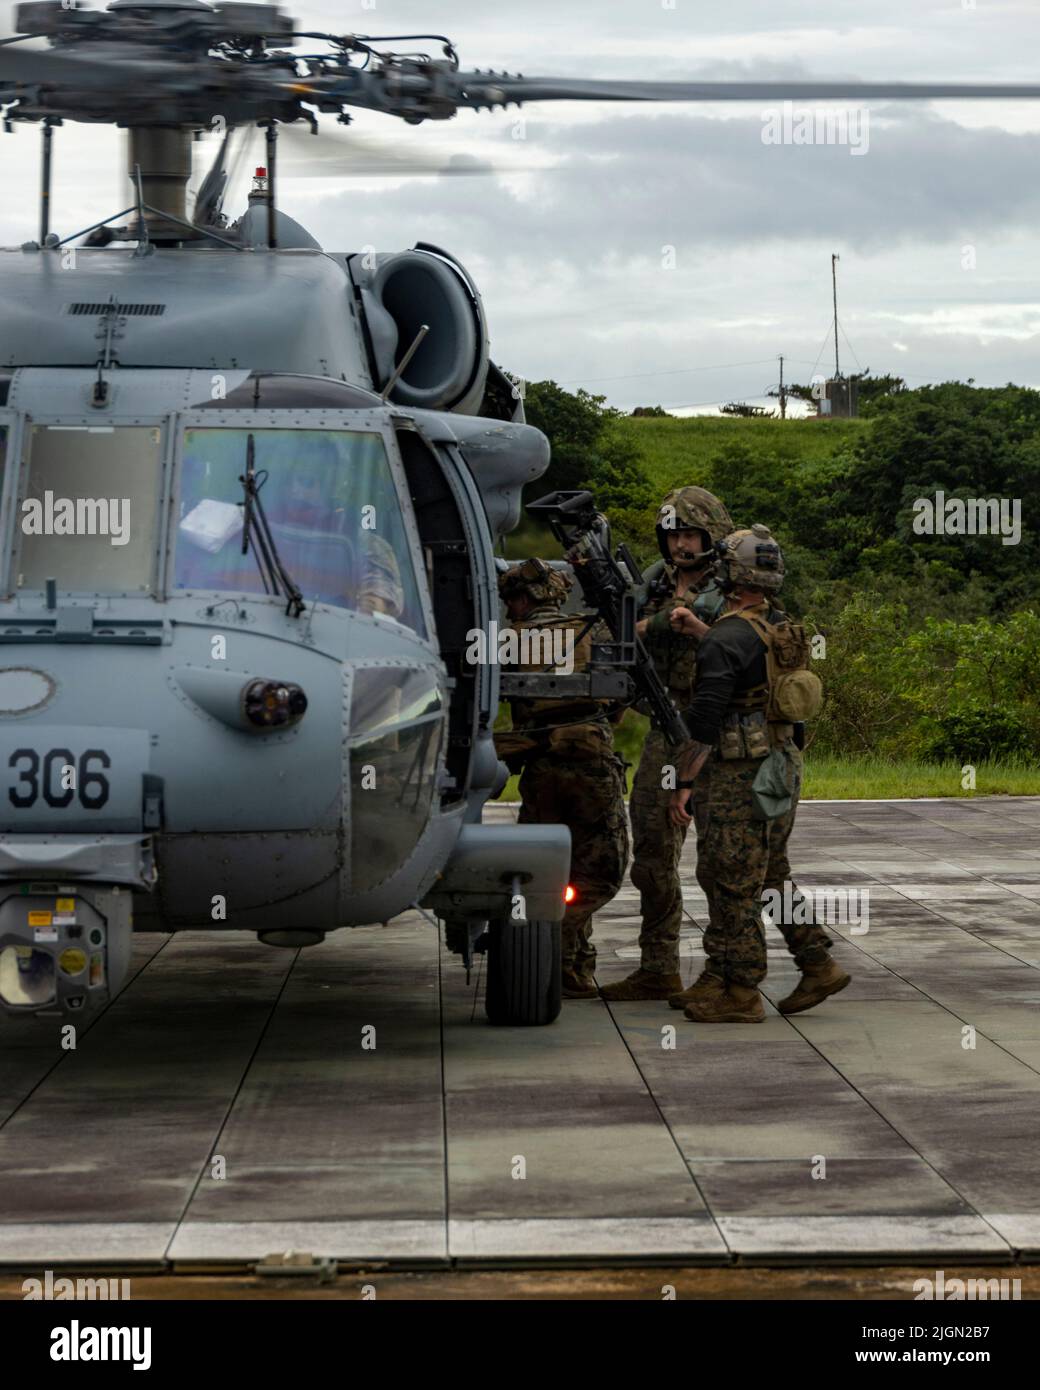 U.S. service members exit a U.S. Navy Sikorsky SH-60 Seahawk Helicopter with Helicopter Sea Combat Squadron 85, after an aerial sniper training during an Urban Sniper Course on Camp Schwab, Okinawa, Japan, June 15, 2022. The aerial sniper training was led by Marines and military contractors with the Expeditionary Operations Training Group to enhance participating Marines' skills in urban environments through precision fire and engaging simulated targets from an aircraft. (U.S. Marine Corps photo by Lance Cpl. Jonathan Beauchamp) Stock Photo